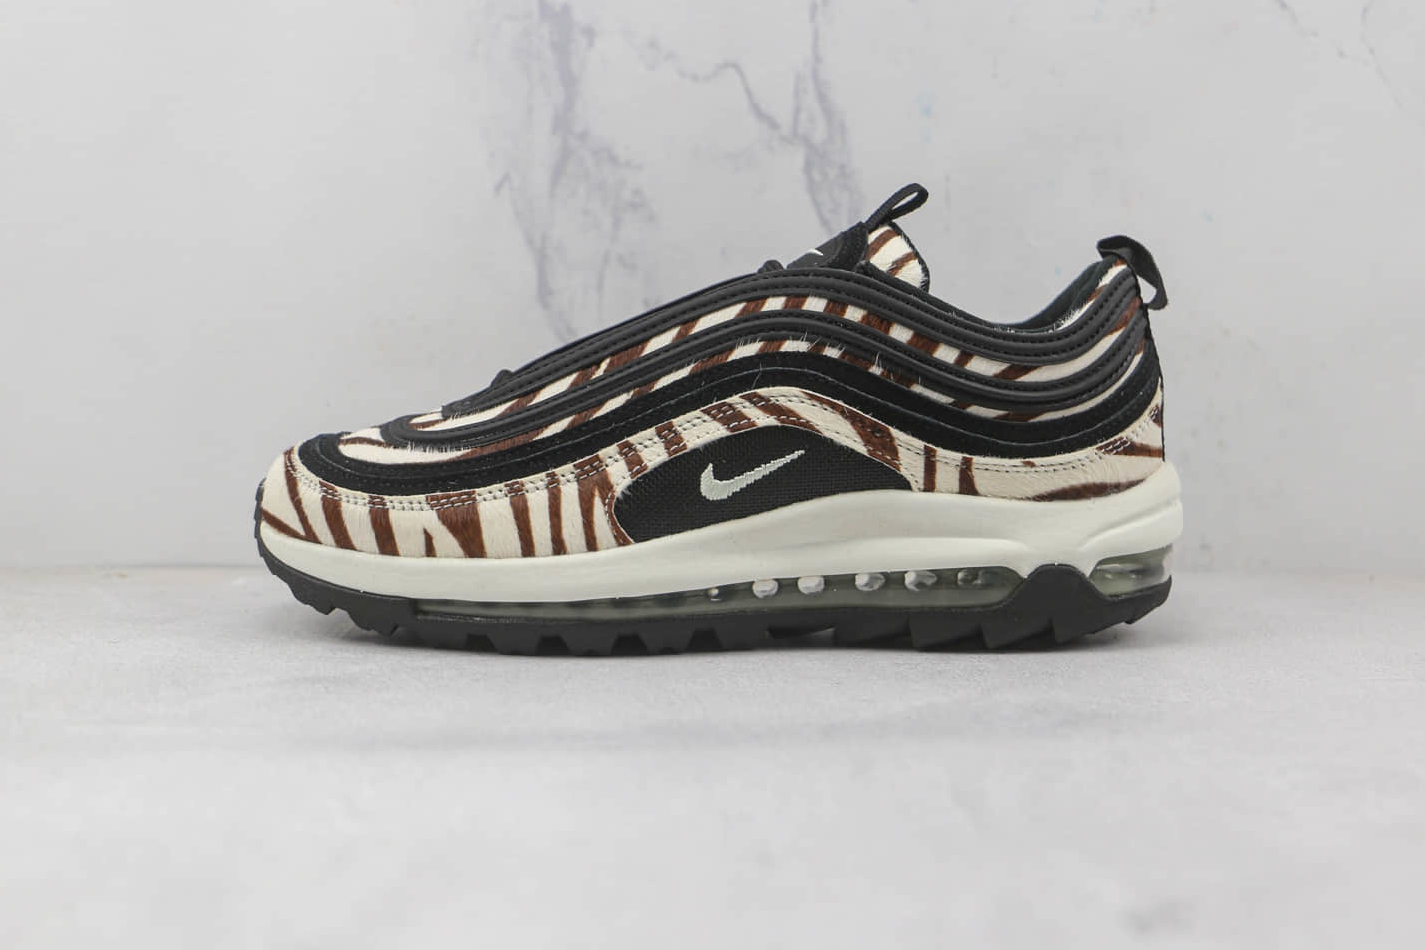 Nike Air Max 97 Golf NRG 'Zebra' DH1313-001 - Stylish and Performance-Driven Footwear | Shop now!